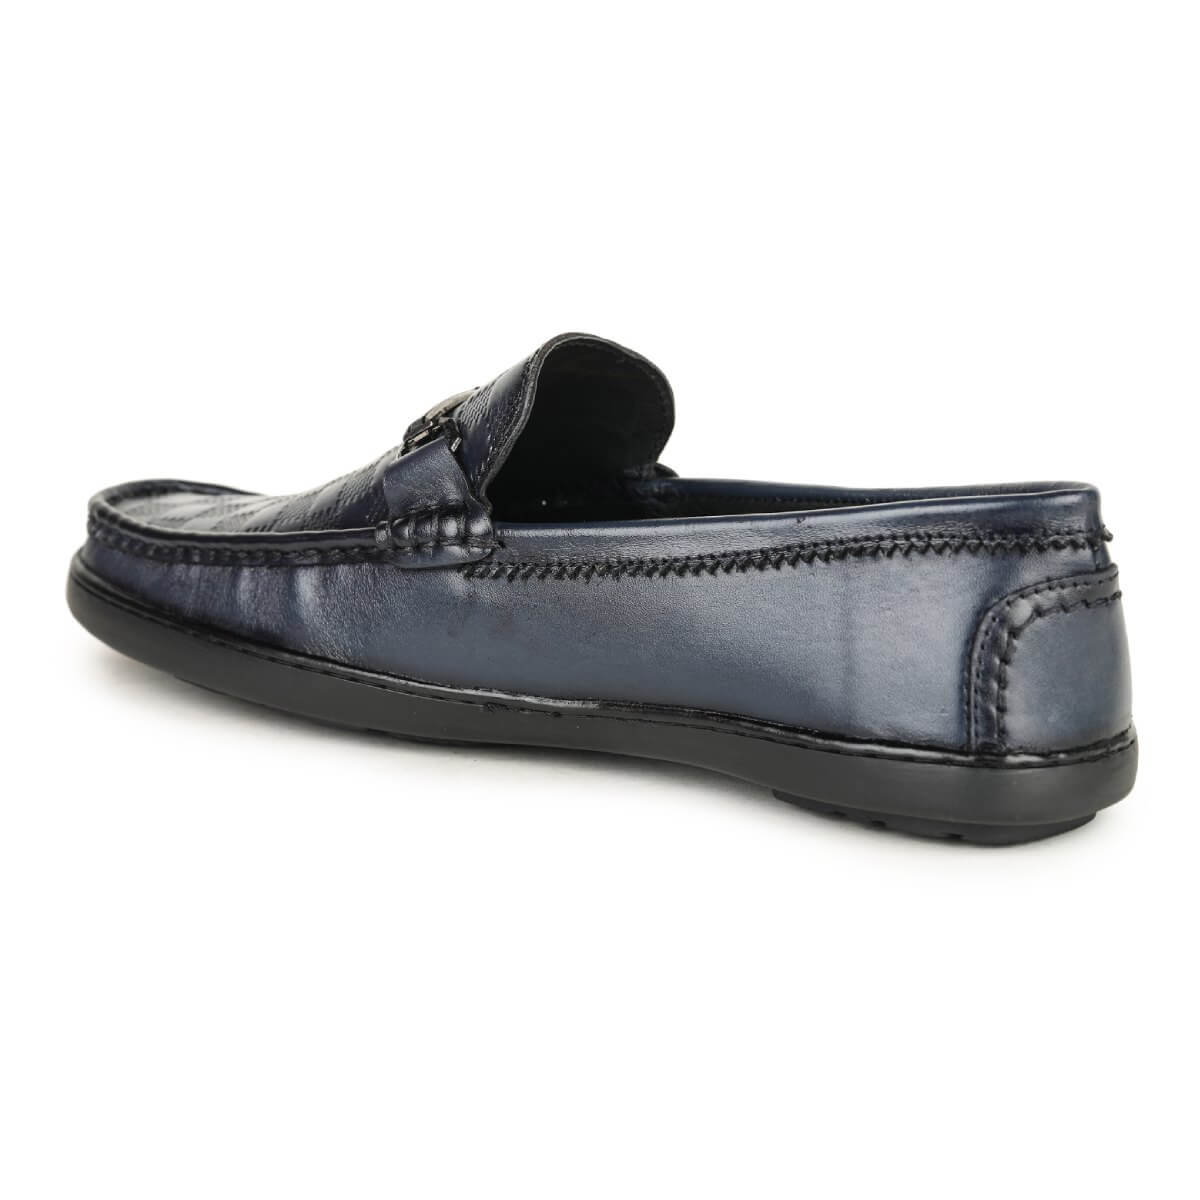 checkbox pattern loafers blue_7